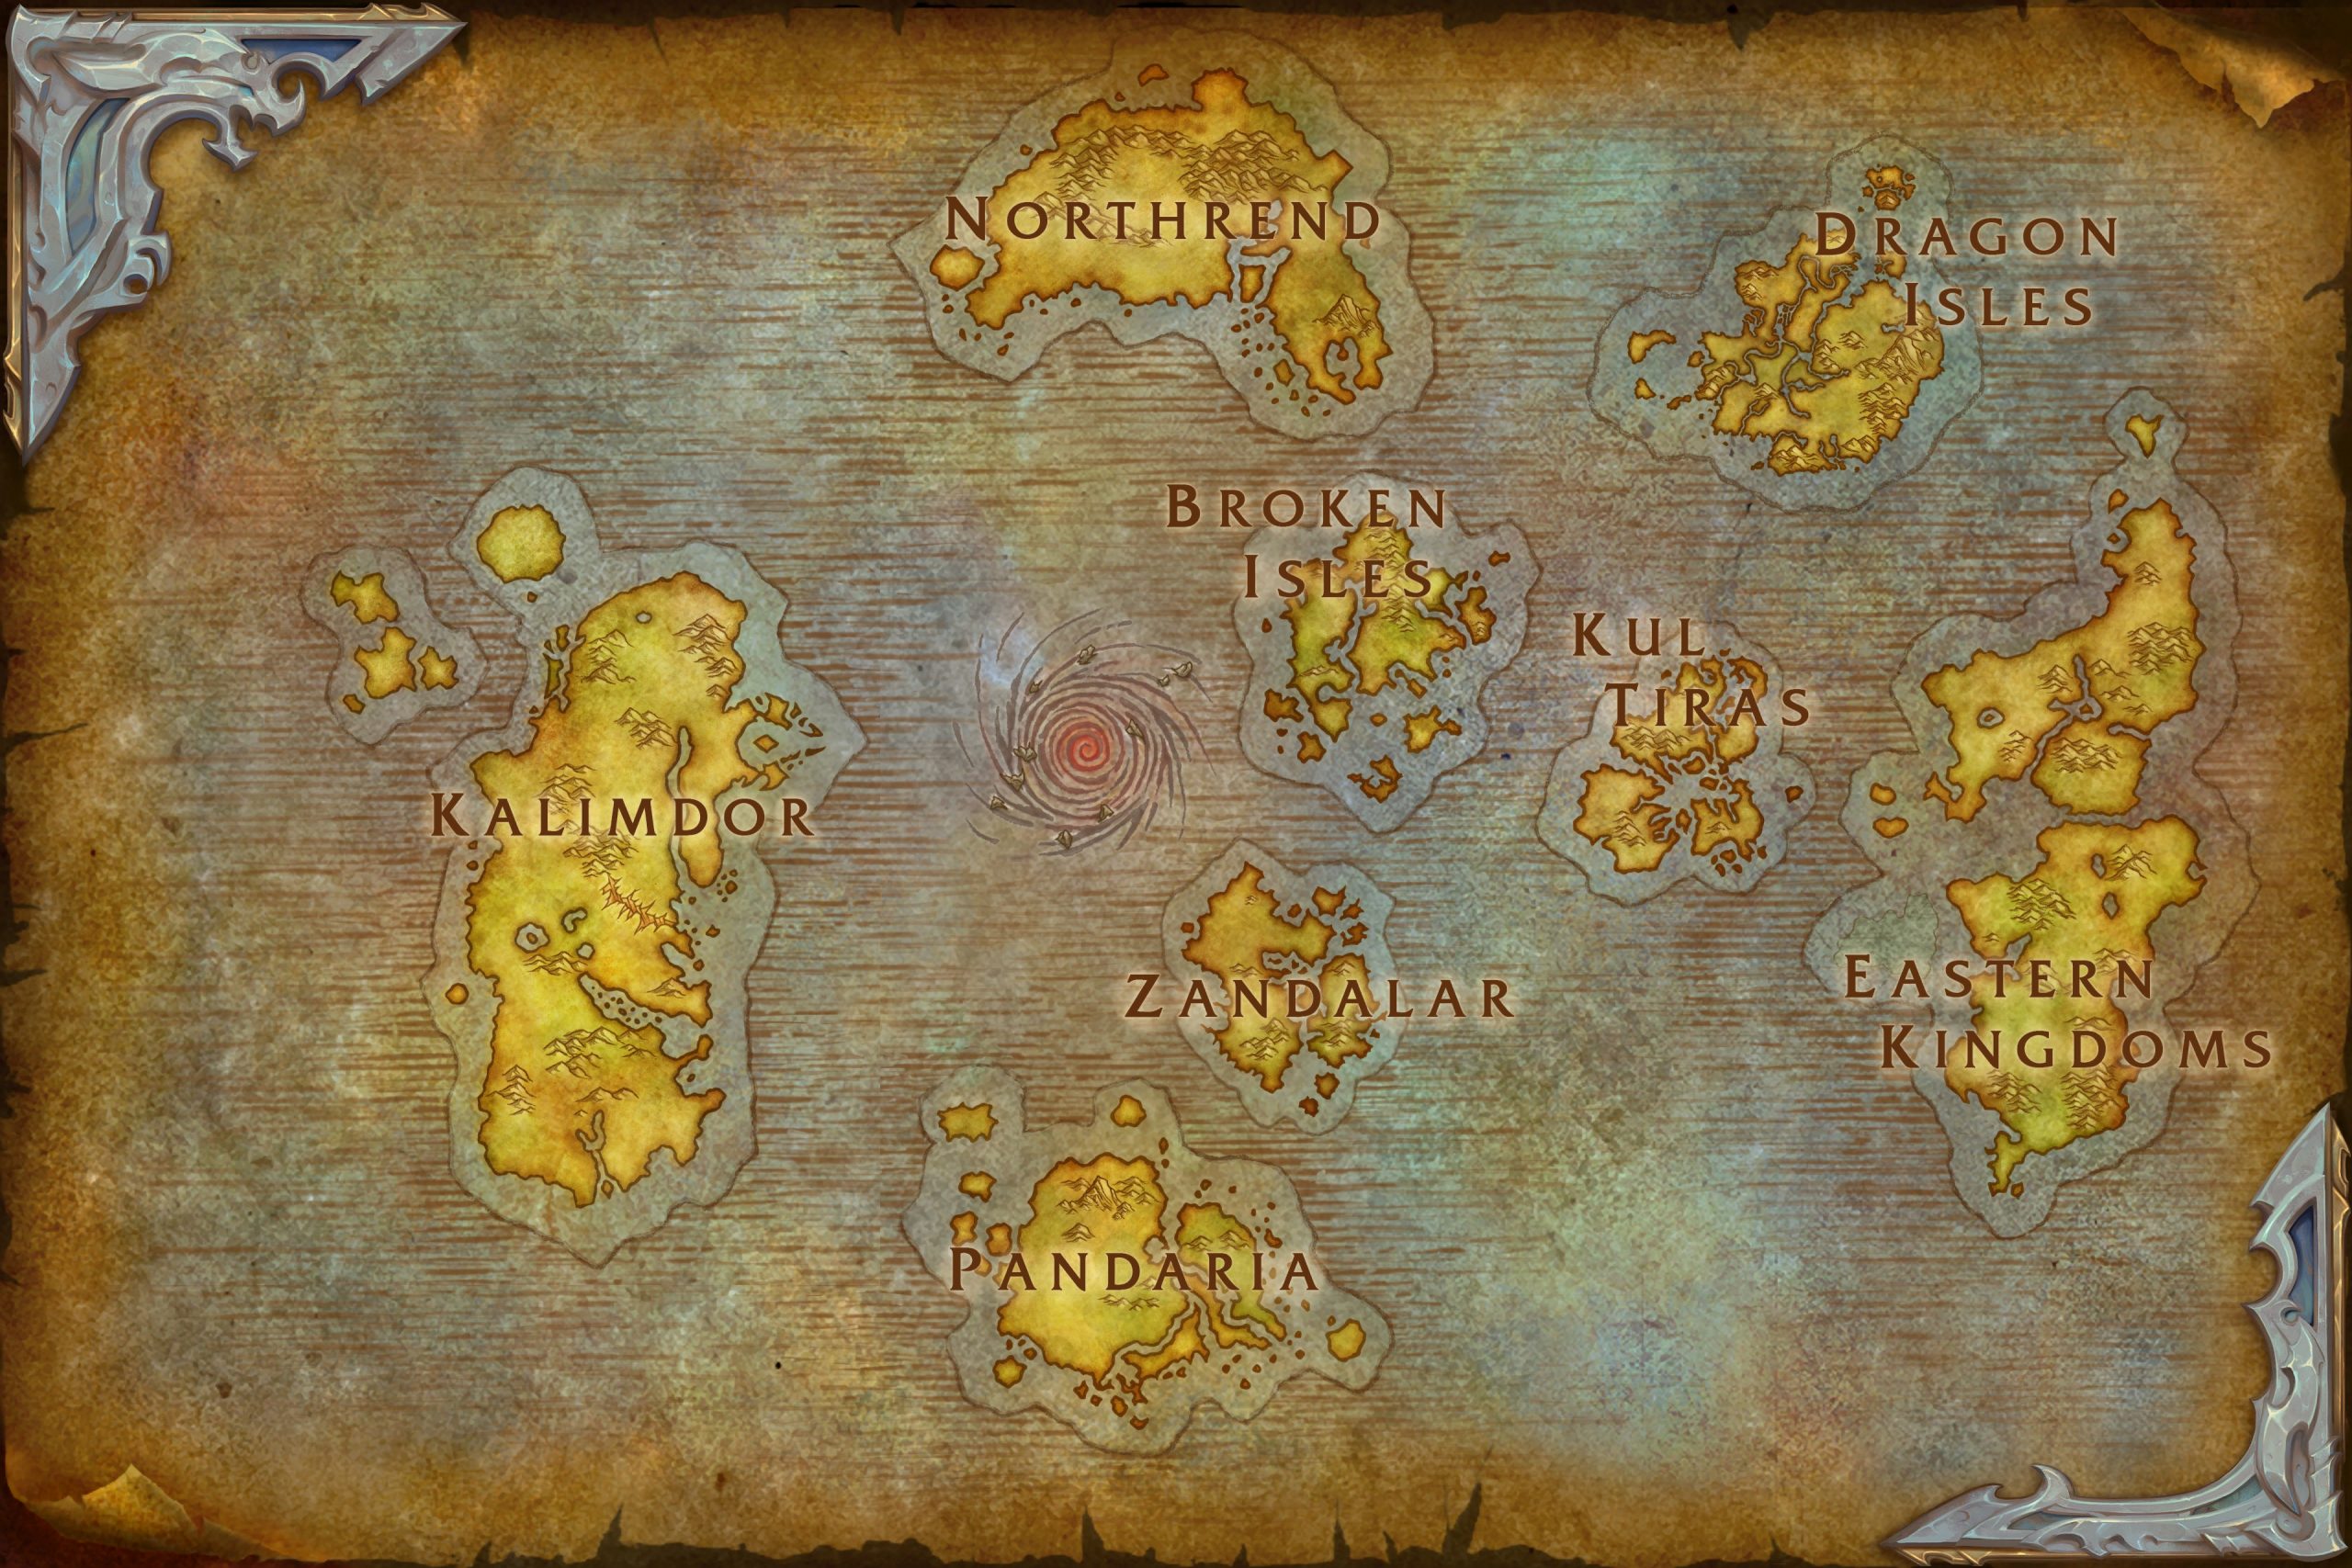 The updated Dragonflight version of Azeroth's map.